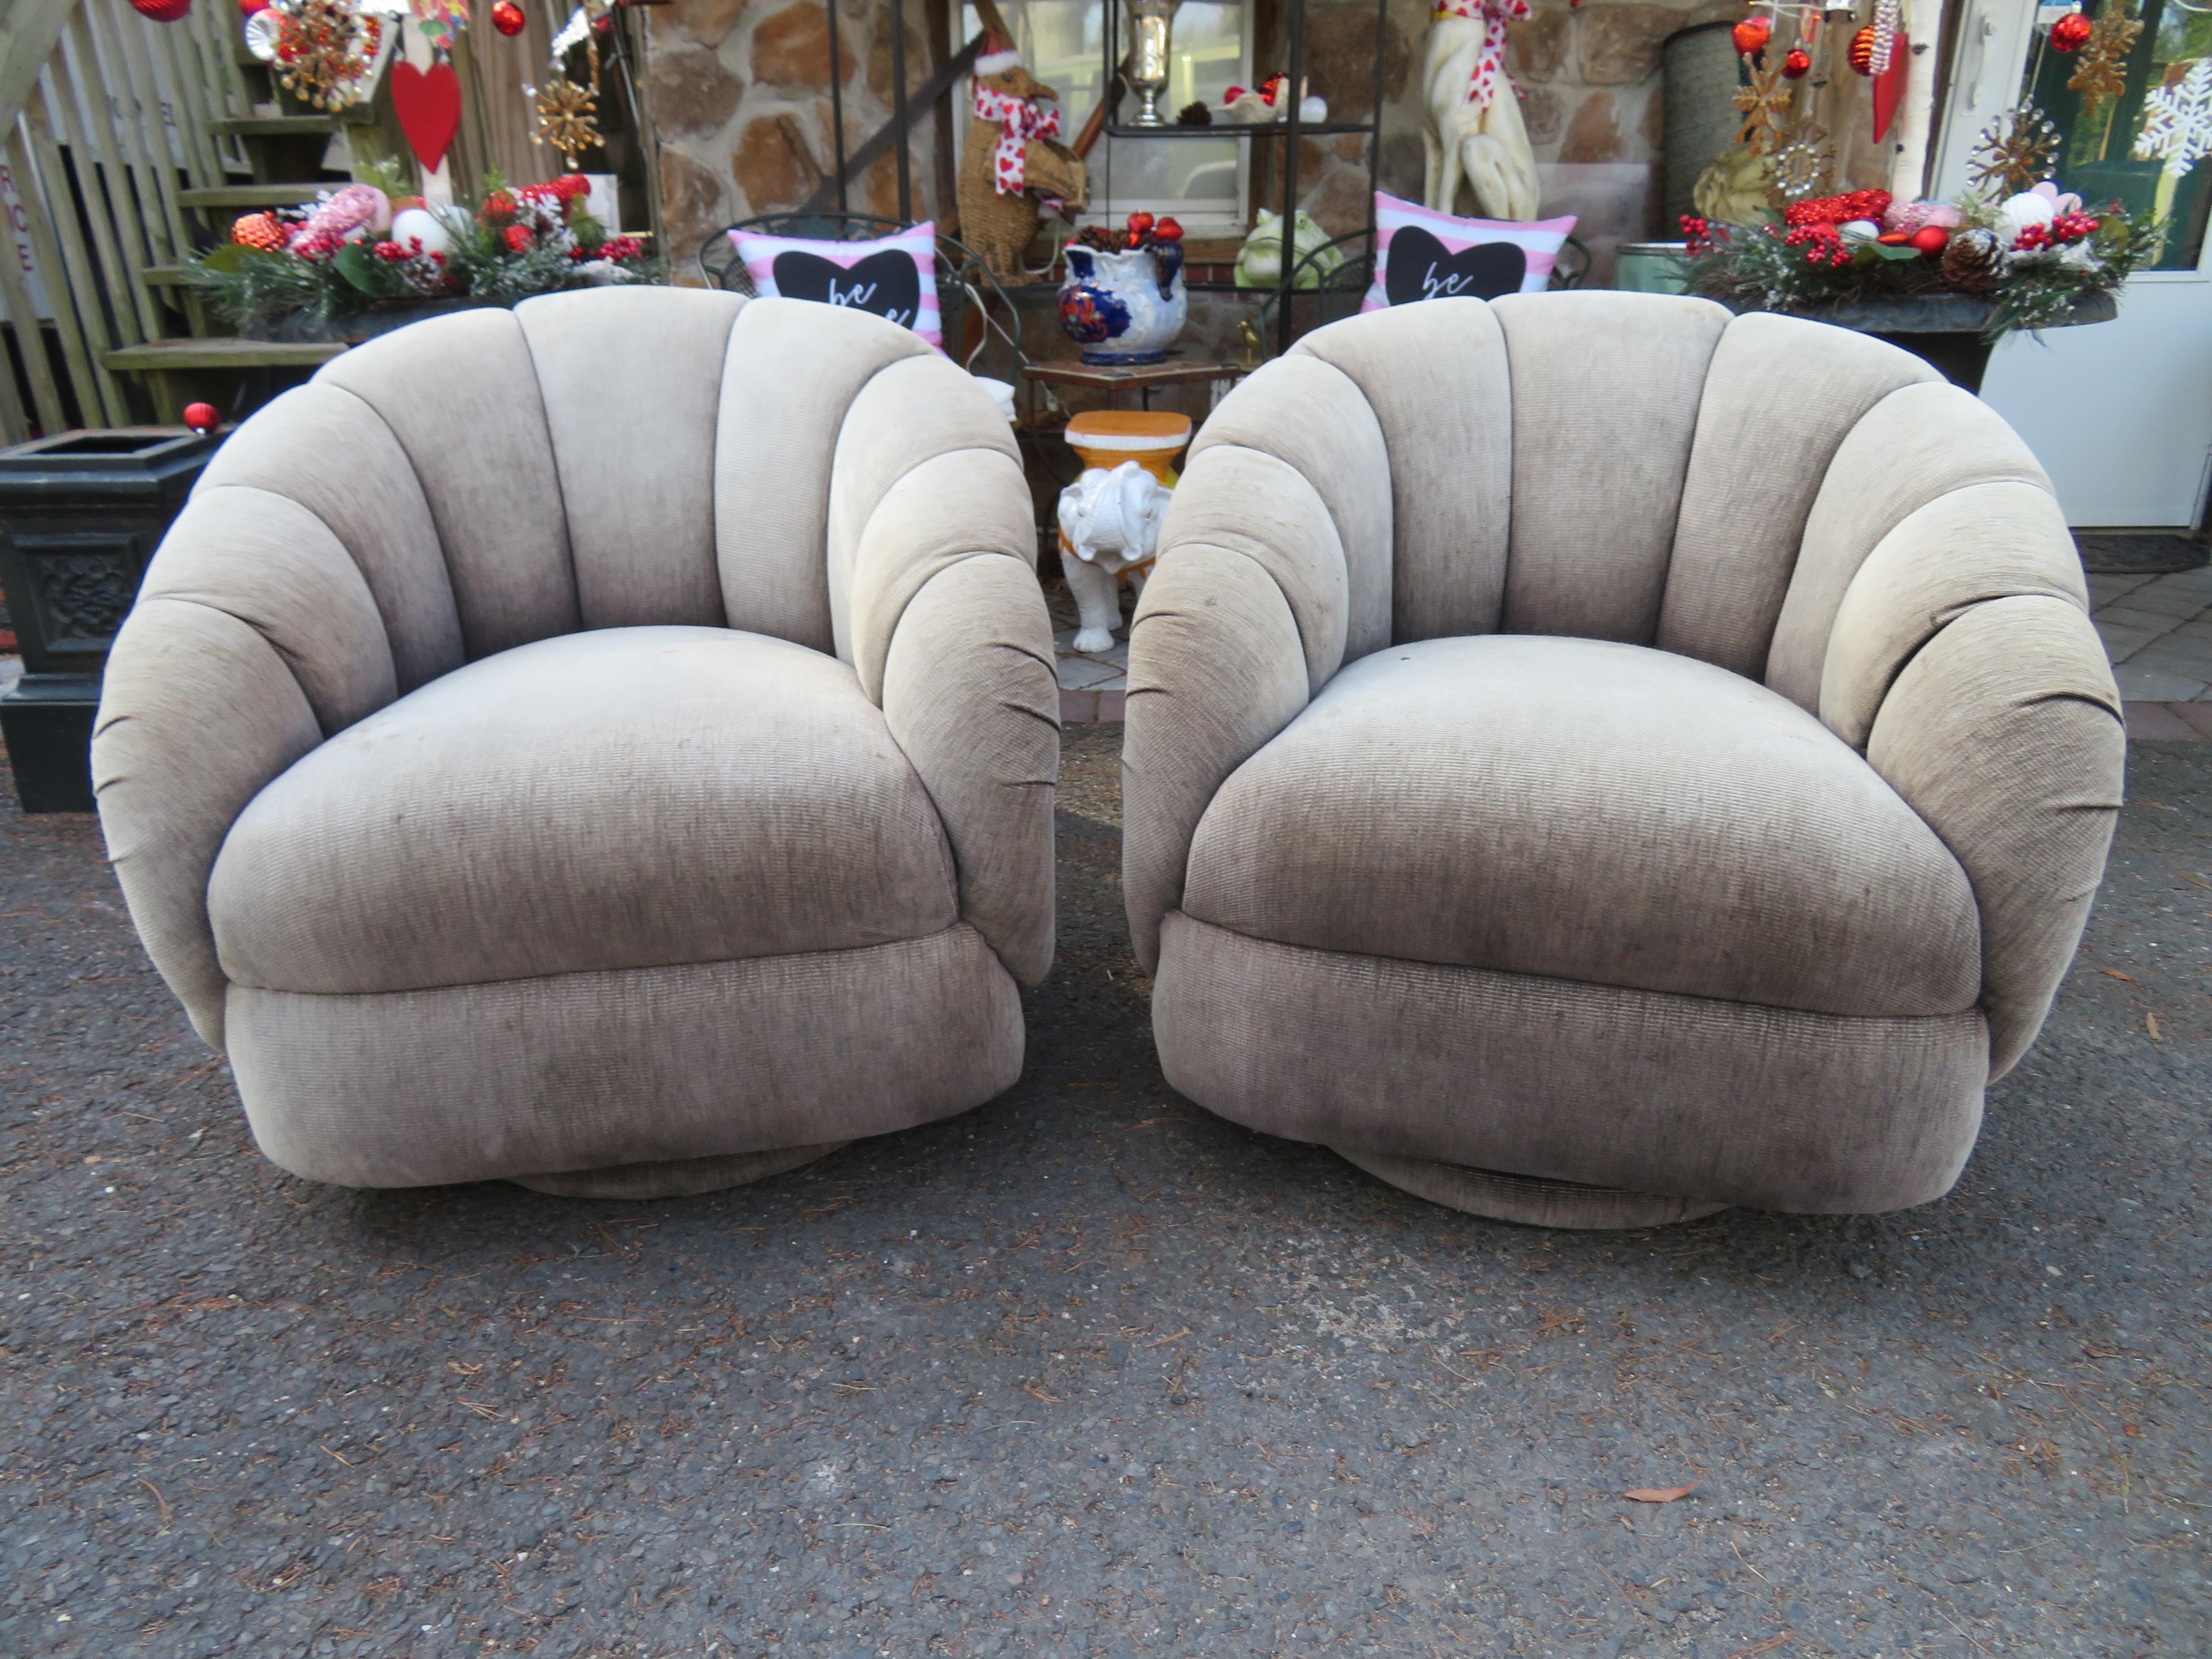 Wonderful pair of croissant barrel back swivel rocker lounge chairs. We love the channel tufted barrel backs that remind us of yummy croissants along with the swivel rocker action. These will definitely need to be reupholstered but the chairs are